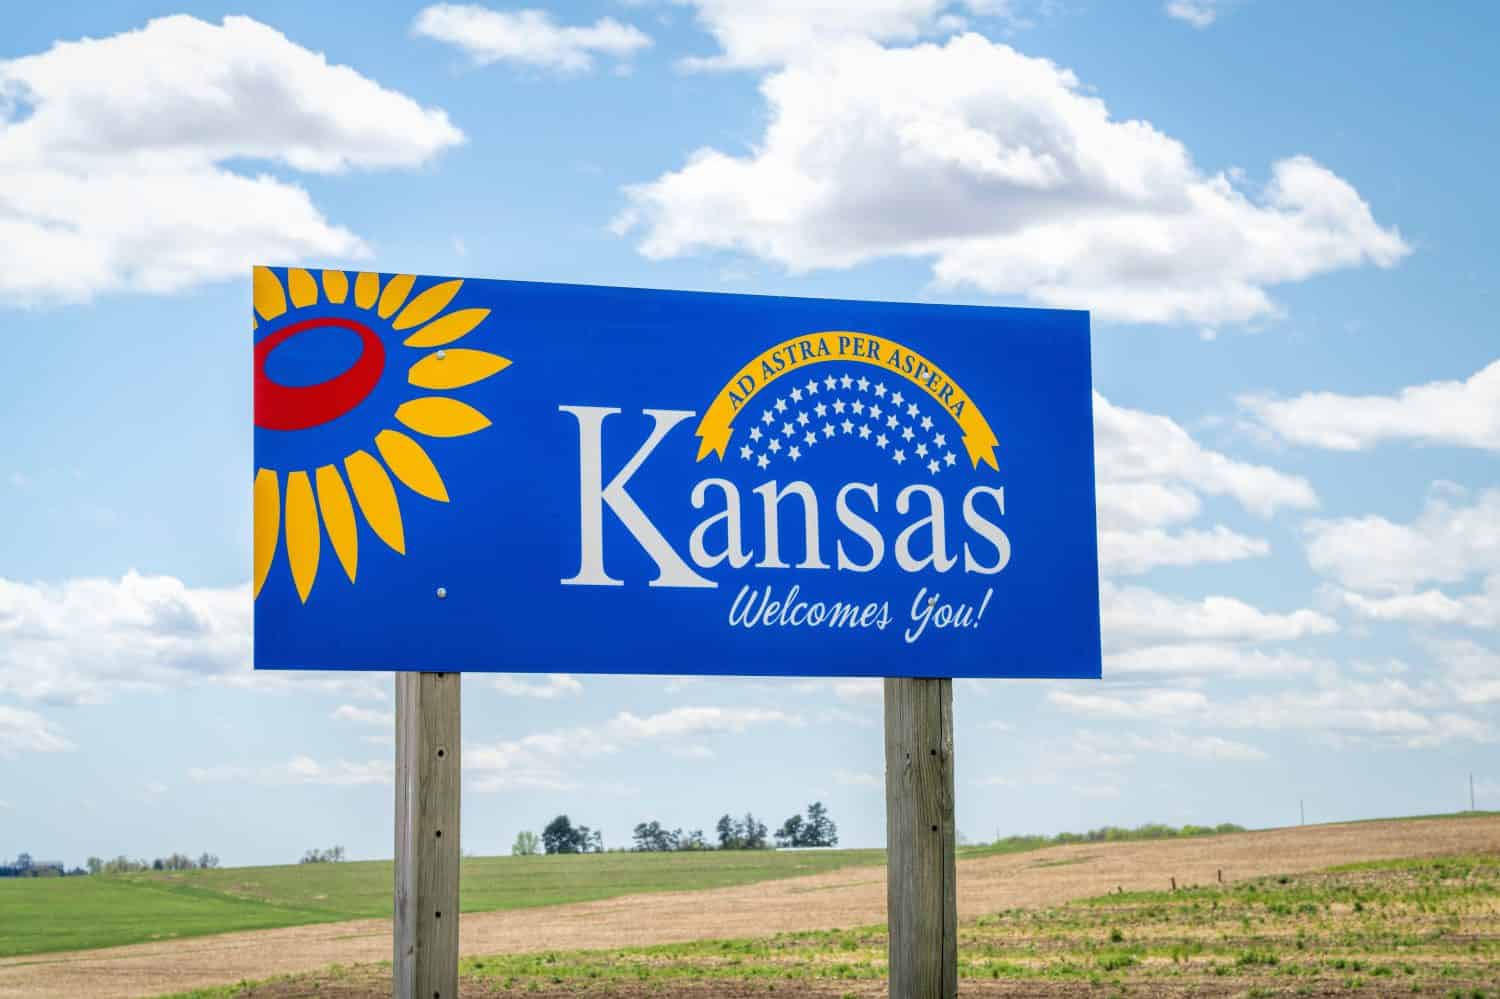 Kansas welcomes you - welcome roadside sign with a popular Latin phrase ad astra per aspera (through hardships to the stars), driving and travel concept